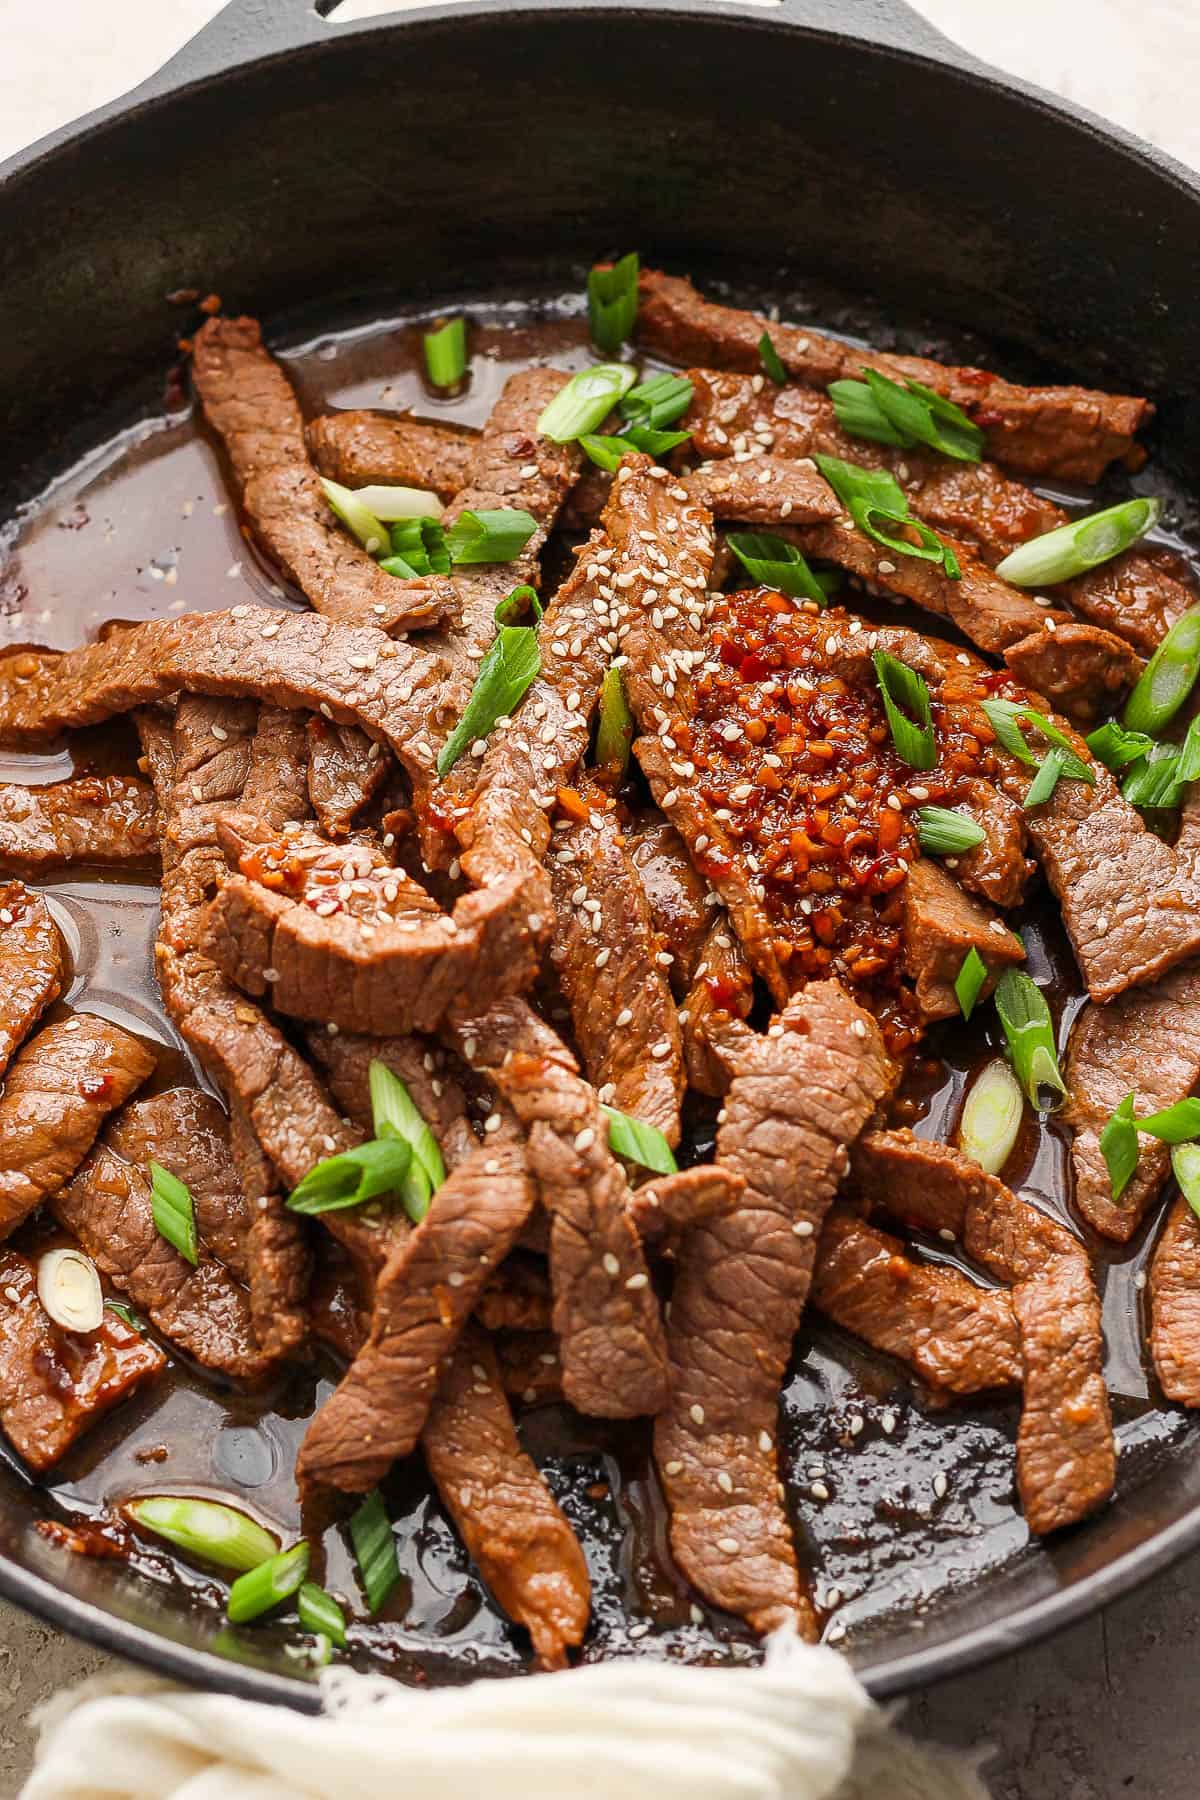 Beef bulgogi in a skillet topped with sliced green onions.